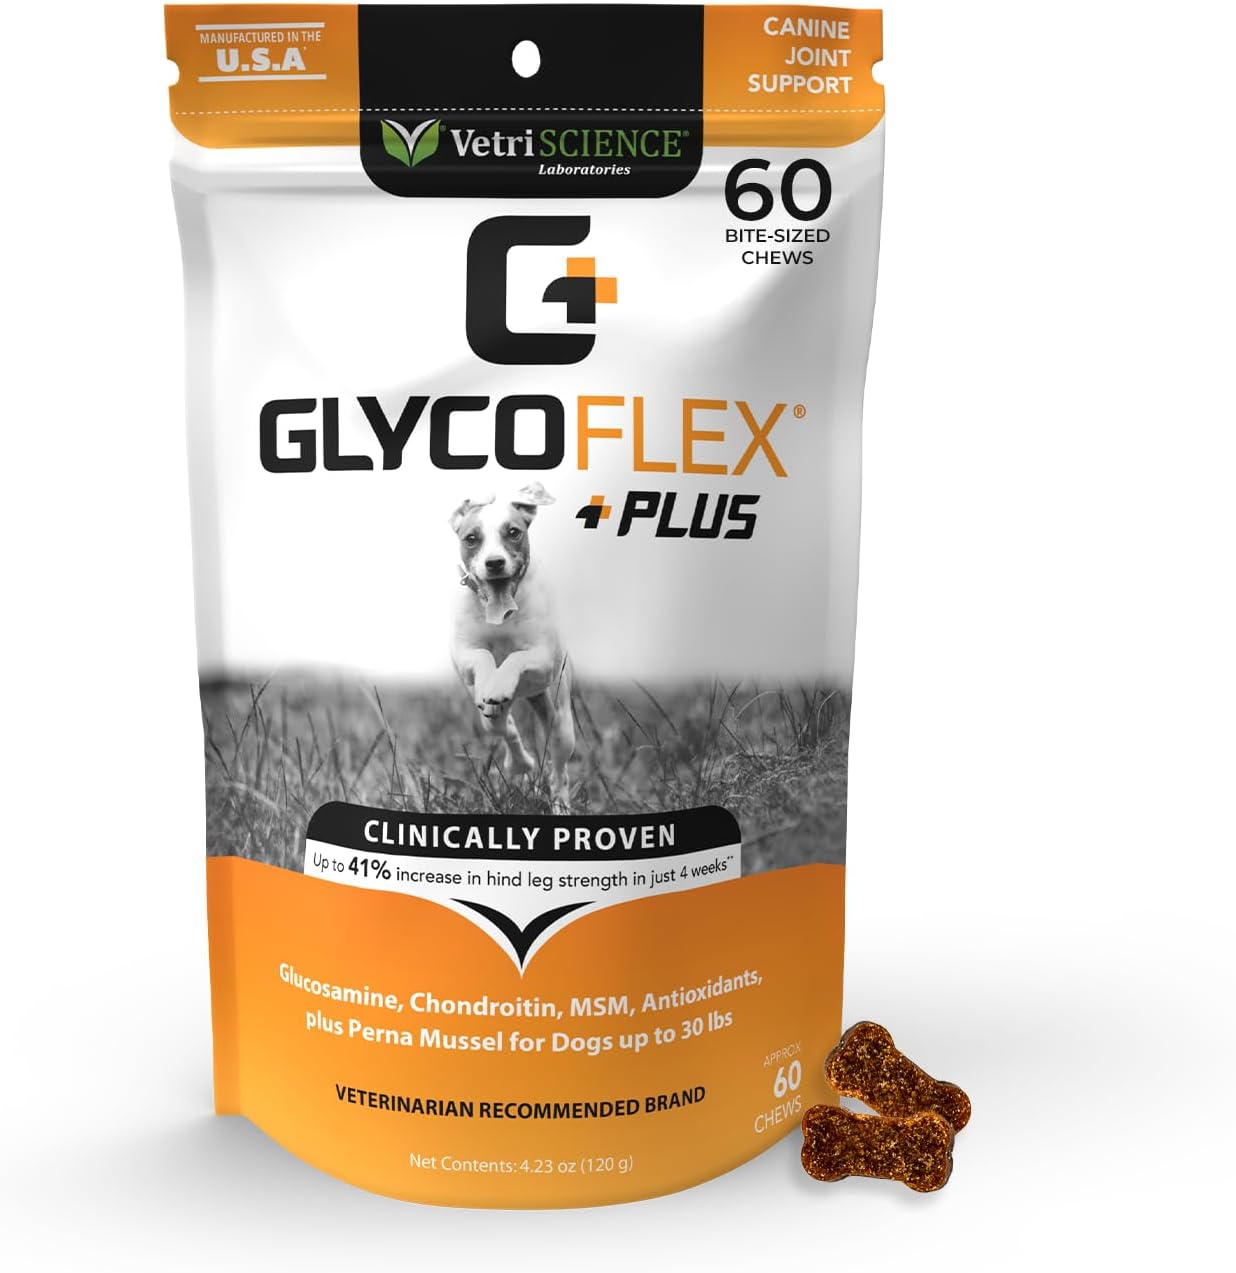 VetriScience GlycoFlex Plus Hip and Joint Supplement for Small Dogs – Extra-Strength Joint Support Chews for Dogs Under 30 Pounds, with Green Lipped Mussel, Chondroitin, and Glucosamine for Dogs